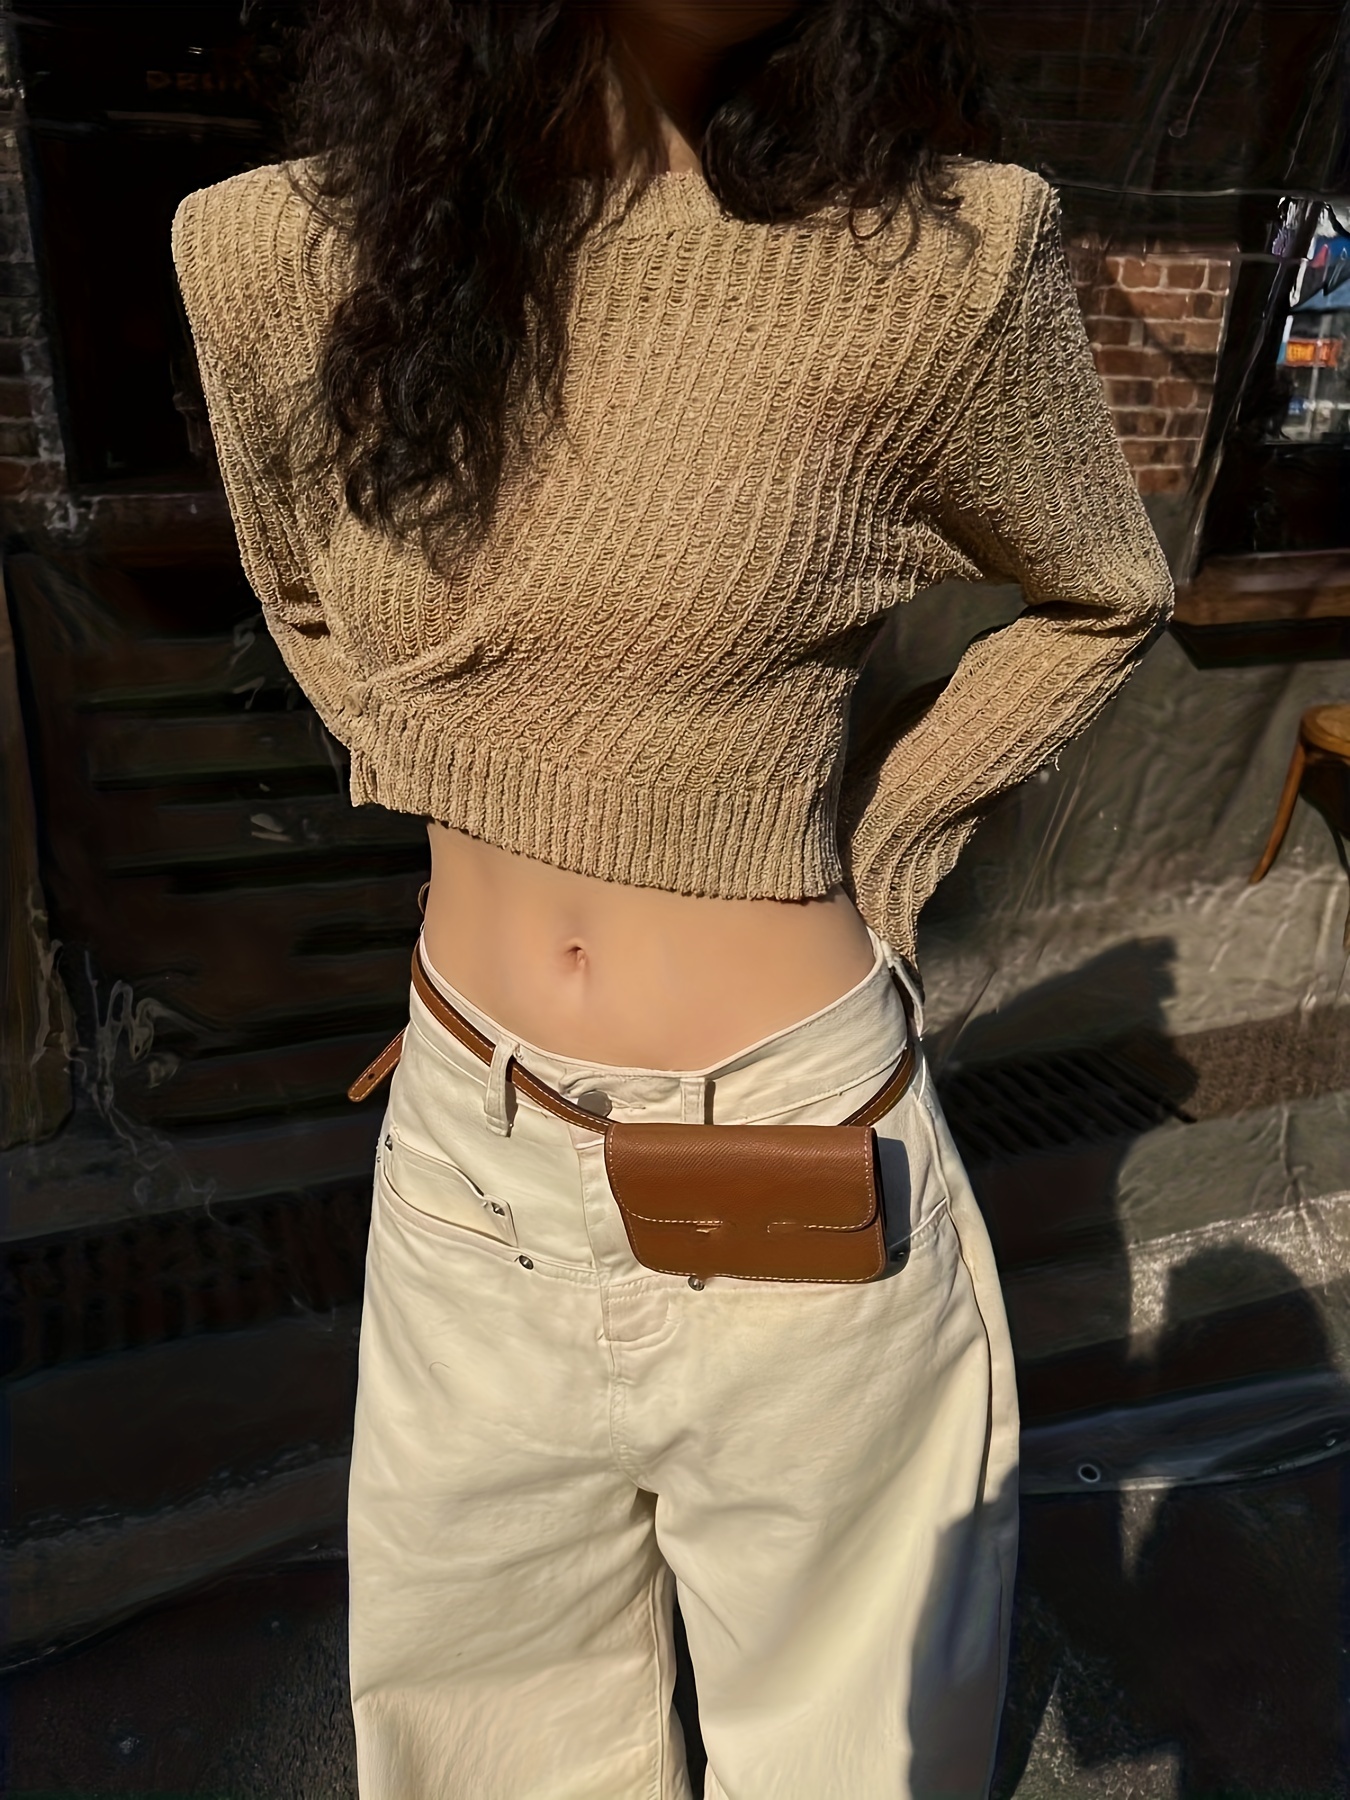 1/2 Sweater Cropped Top - Brown